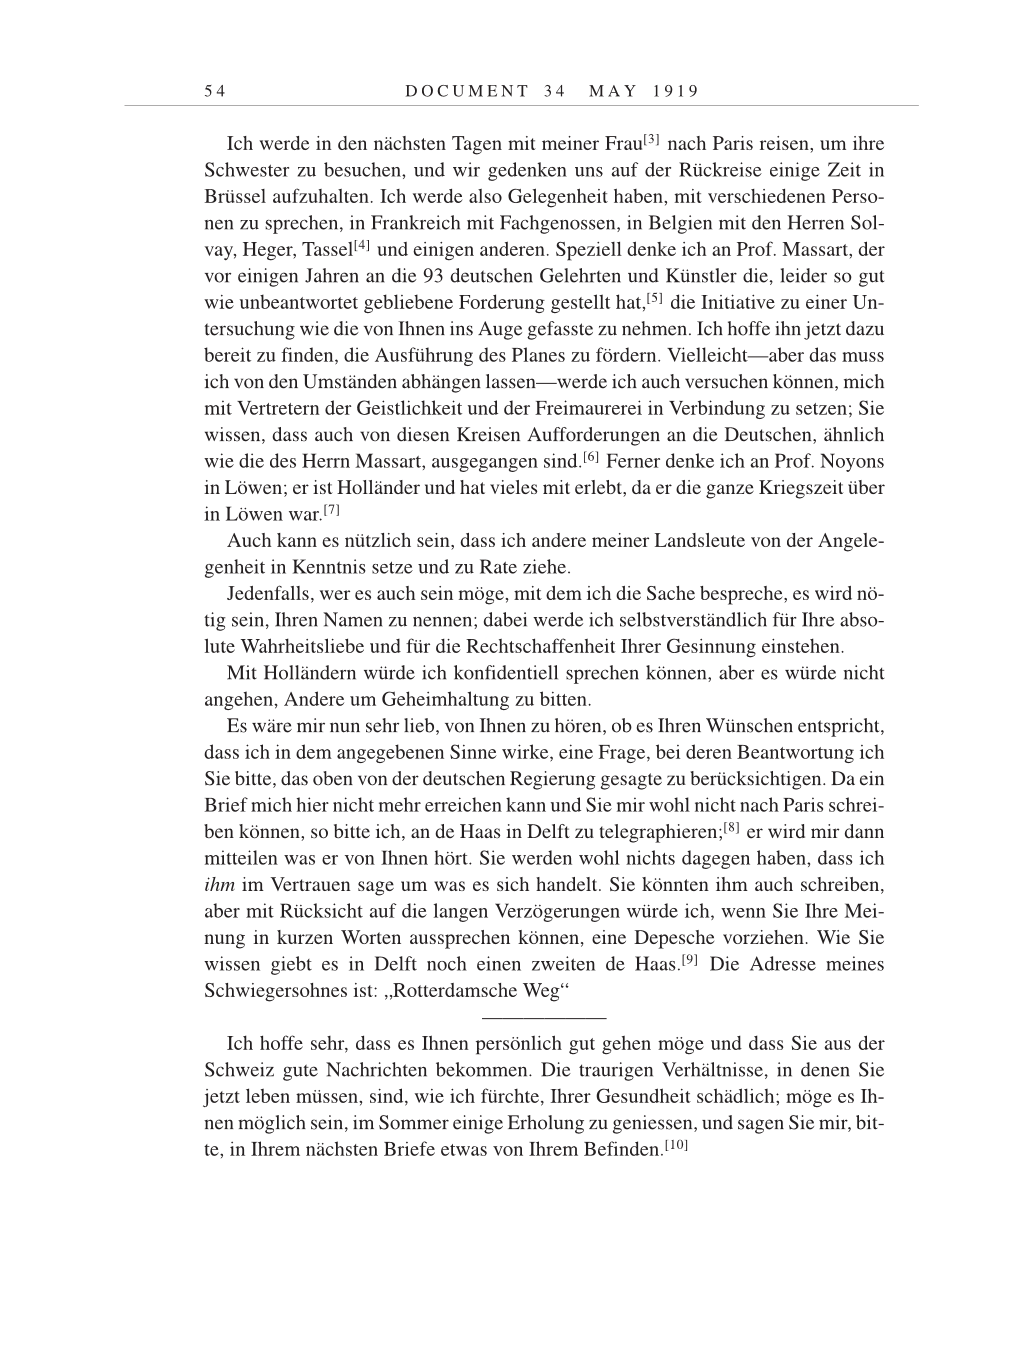 Volume 9: The Berlin Years: Correspondence January 1919-April 1920 page 54